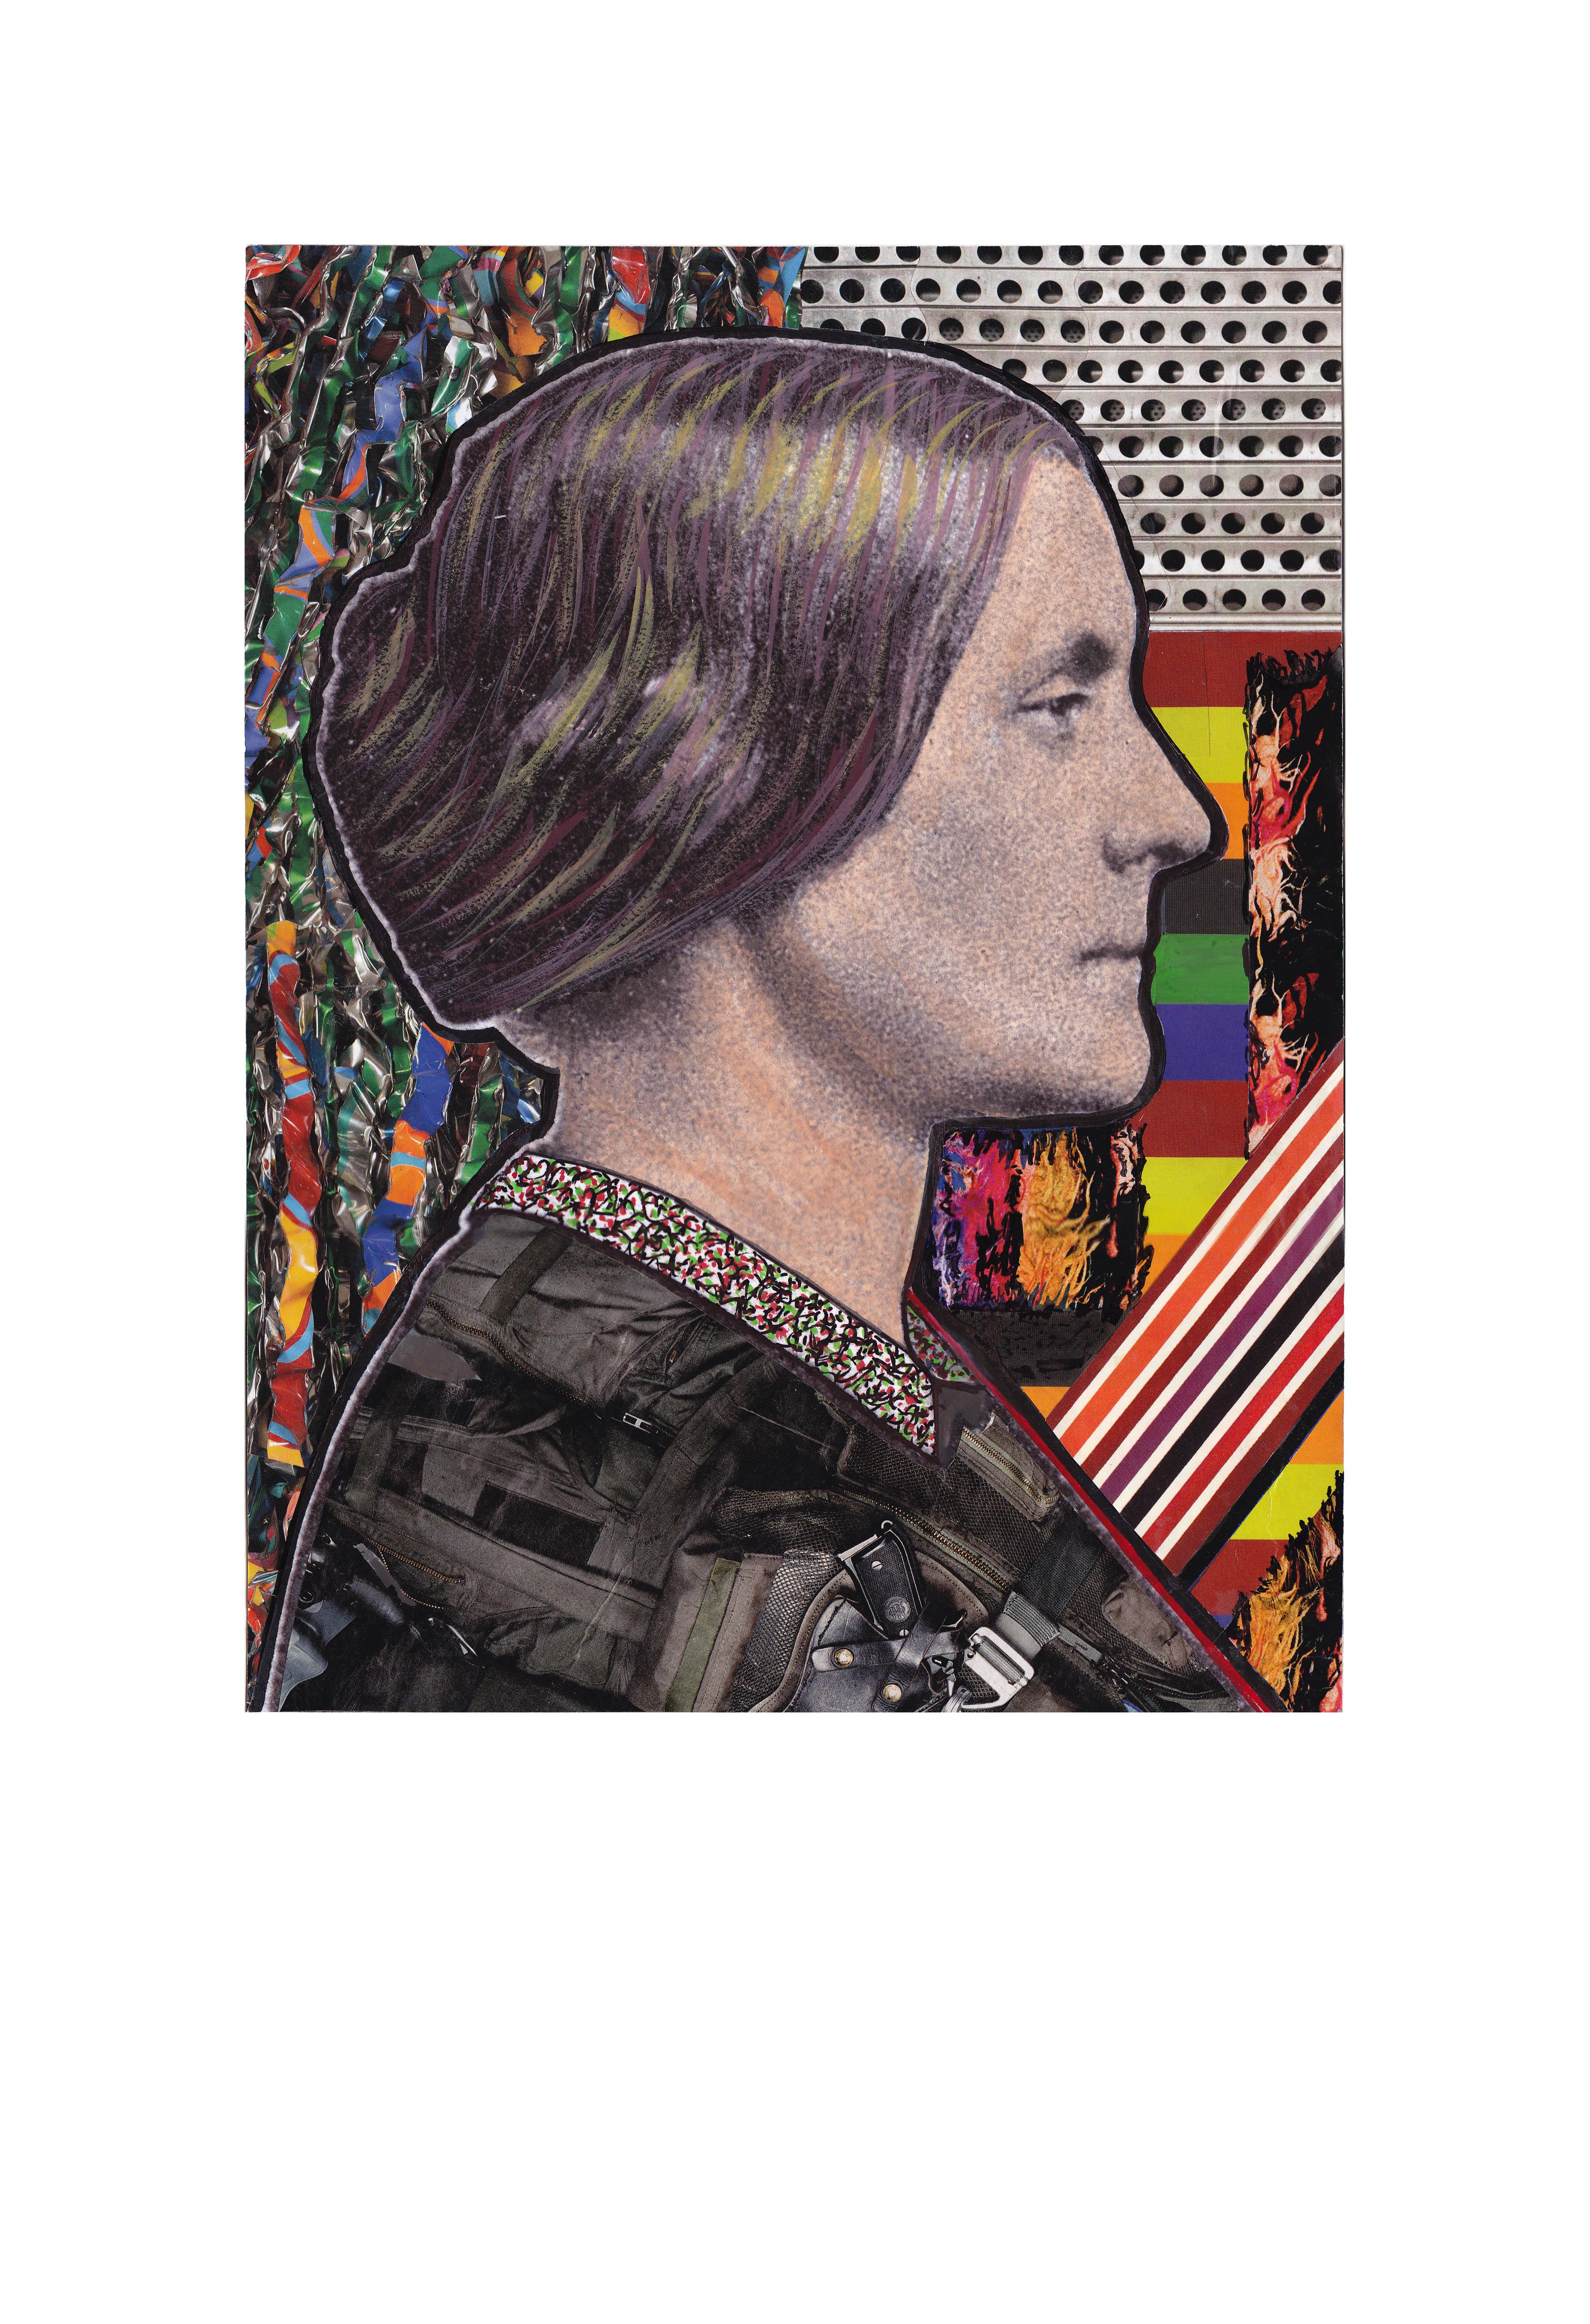  Signed Limited Edition Feminist Contemporary Art Print - Susan B. Anthony 786 